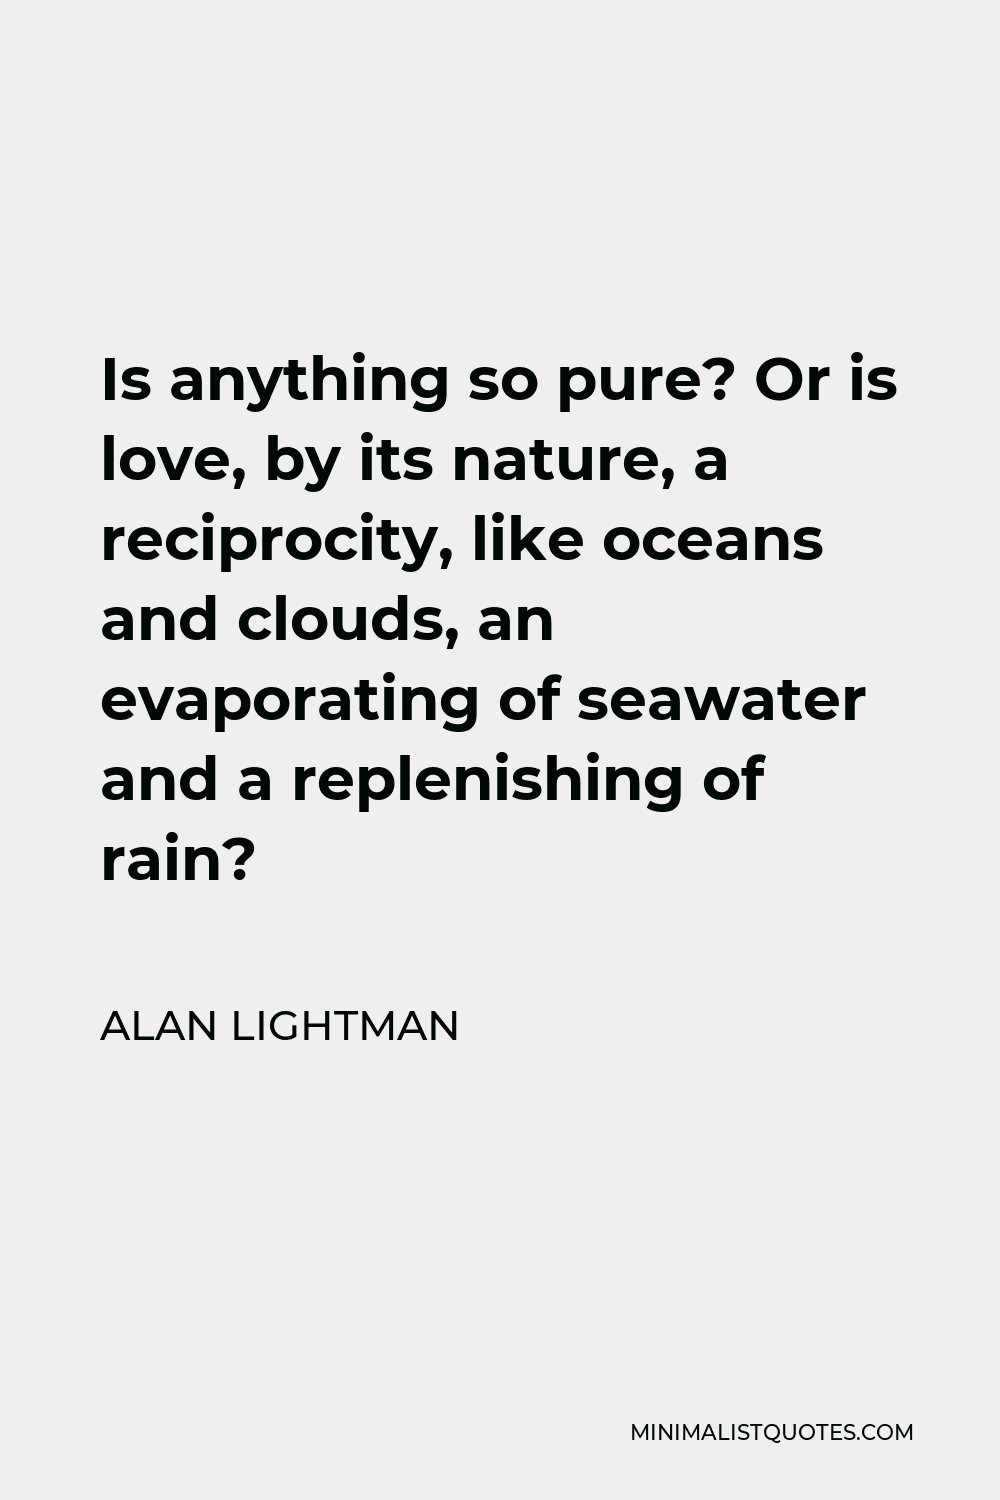 Alan Lightman Quote - Is anything so pure? Or is love, by its nature, a reciprocity, like oceans and clouds, an evaporating of seawater and a replenishing of rain?